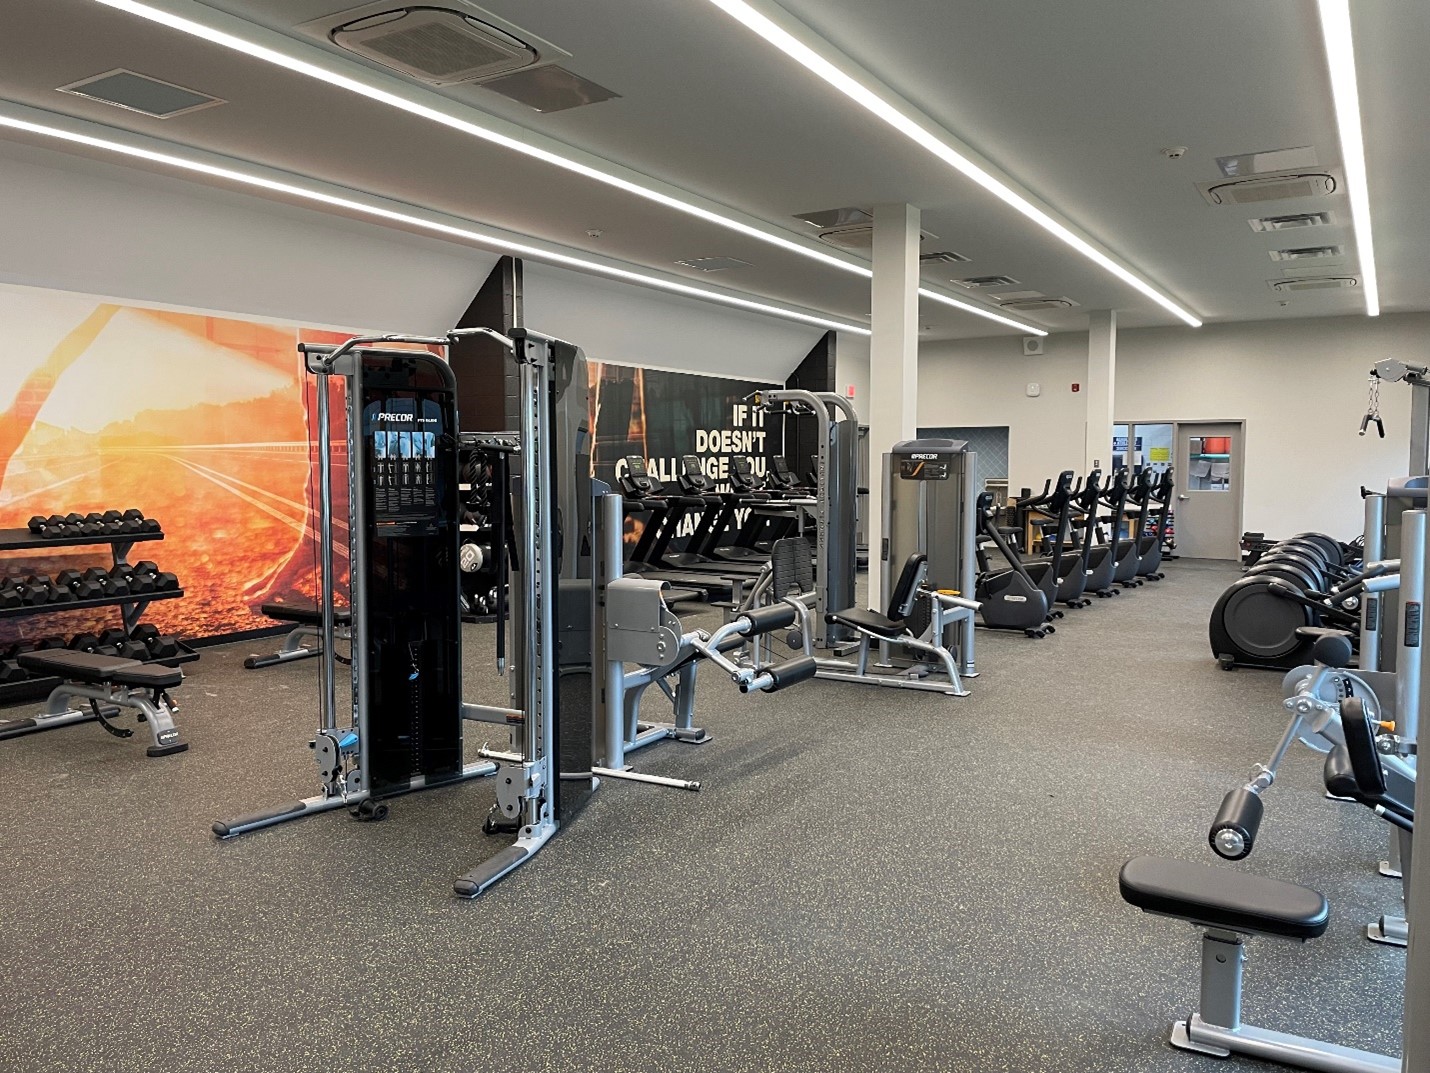 Image shows a fitness center at Pine Bush High School.